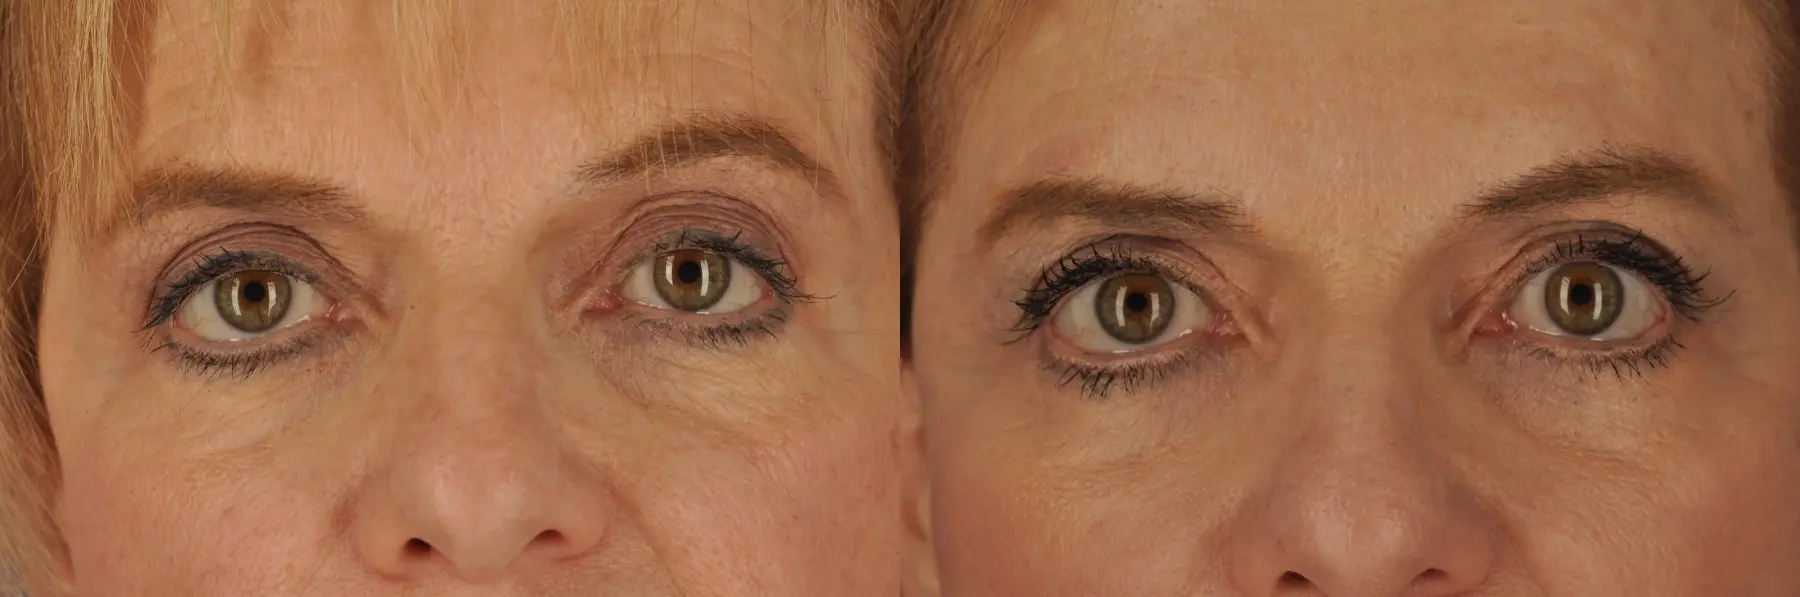 68 year old woman, revision blepharoplasty - Before and After 1